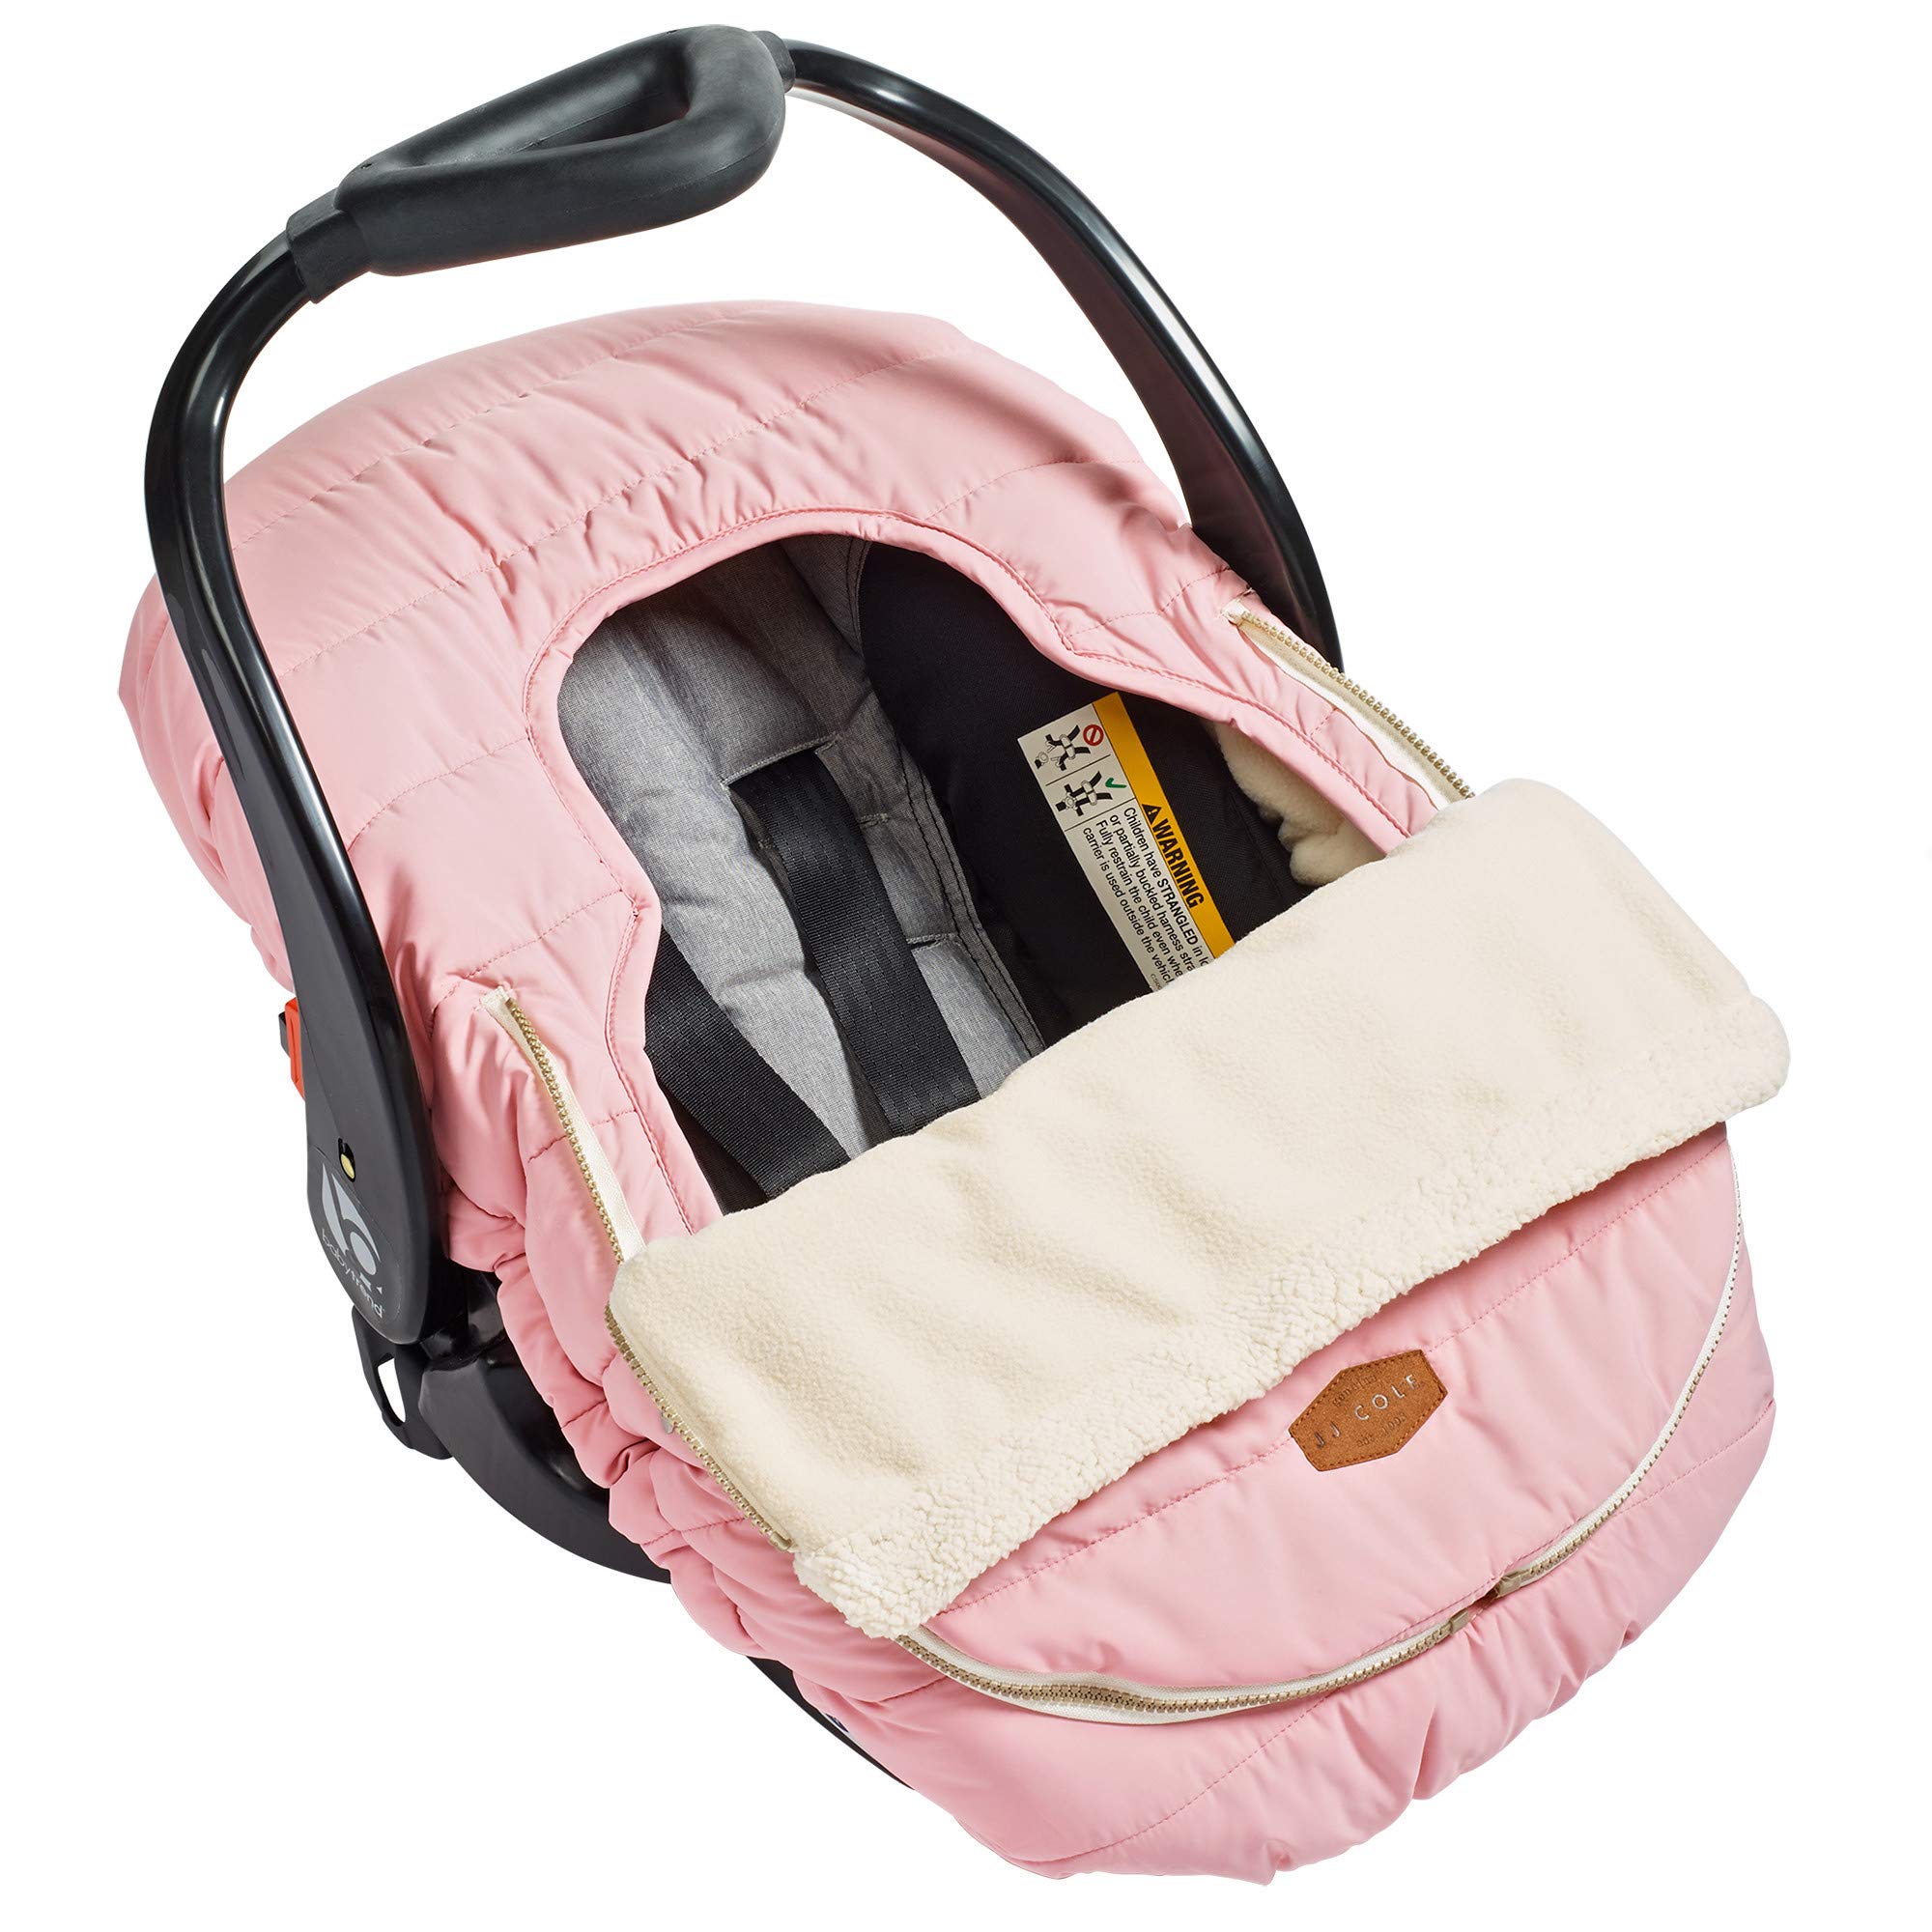 JJ Cole Baby Car Seat Cover, Blanket-Style Baby Stroller & Baby Carrier Cover, Blush Pink